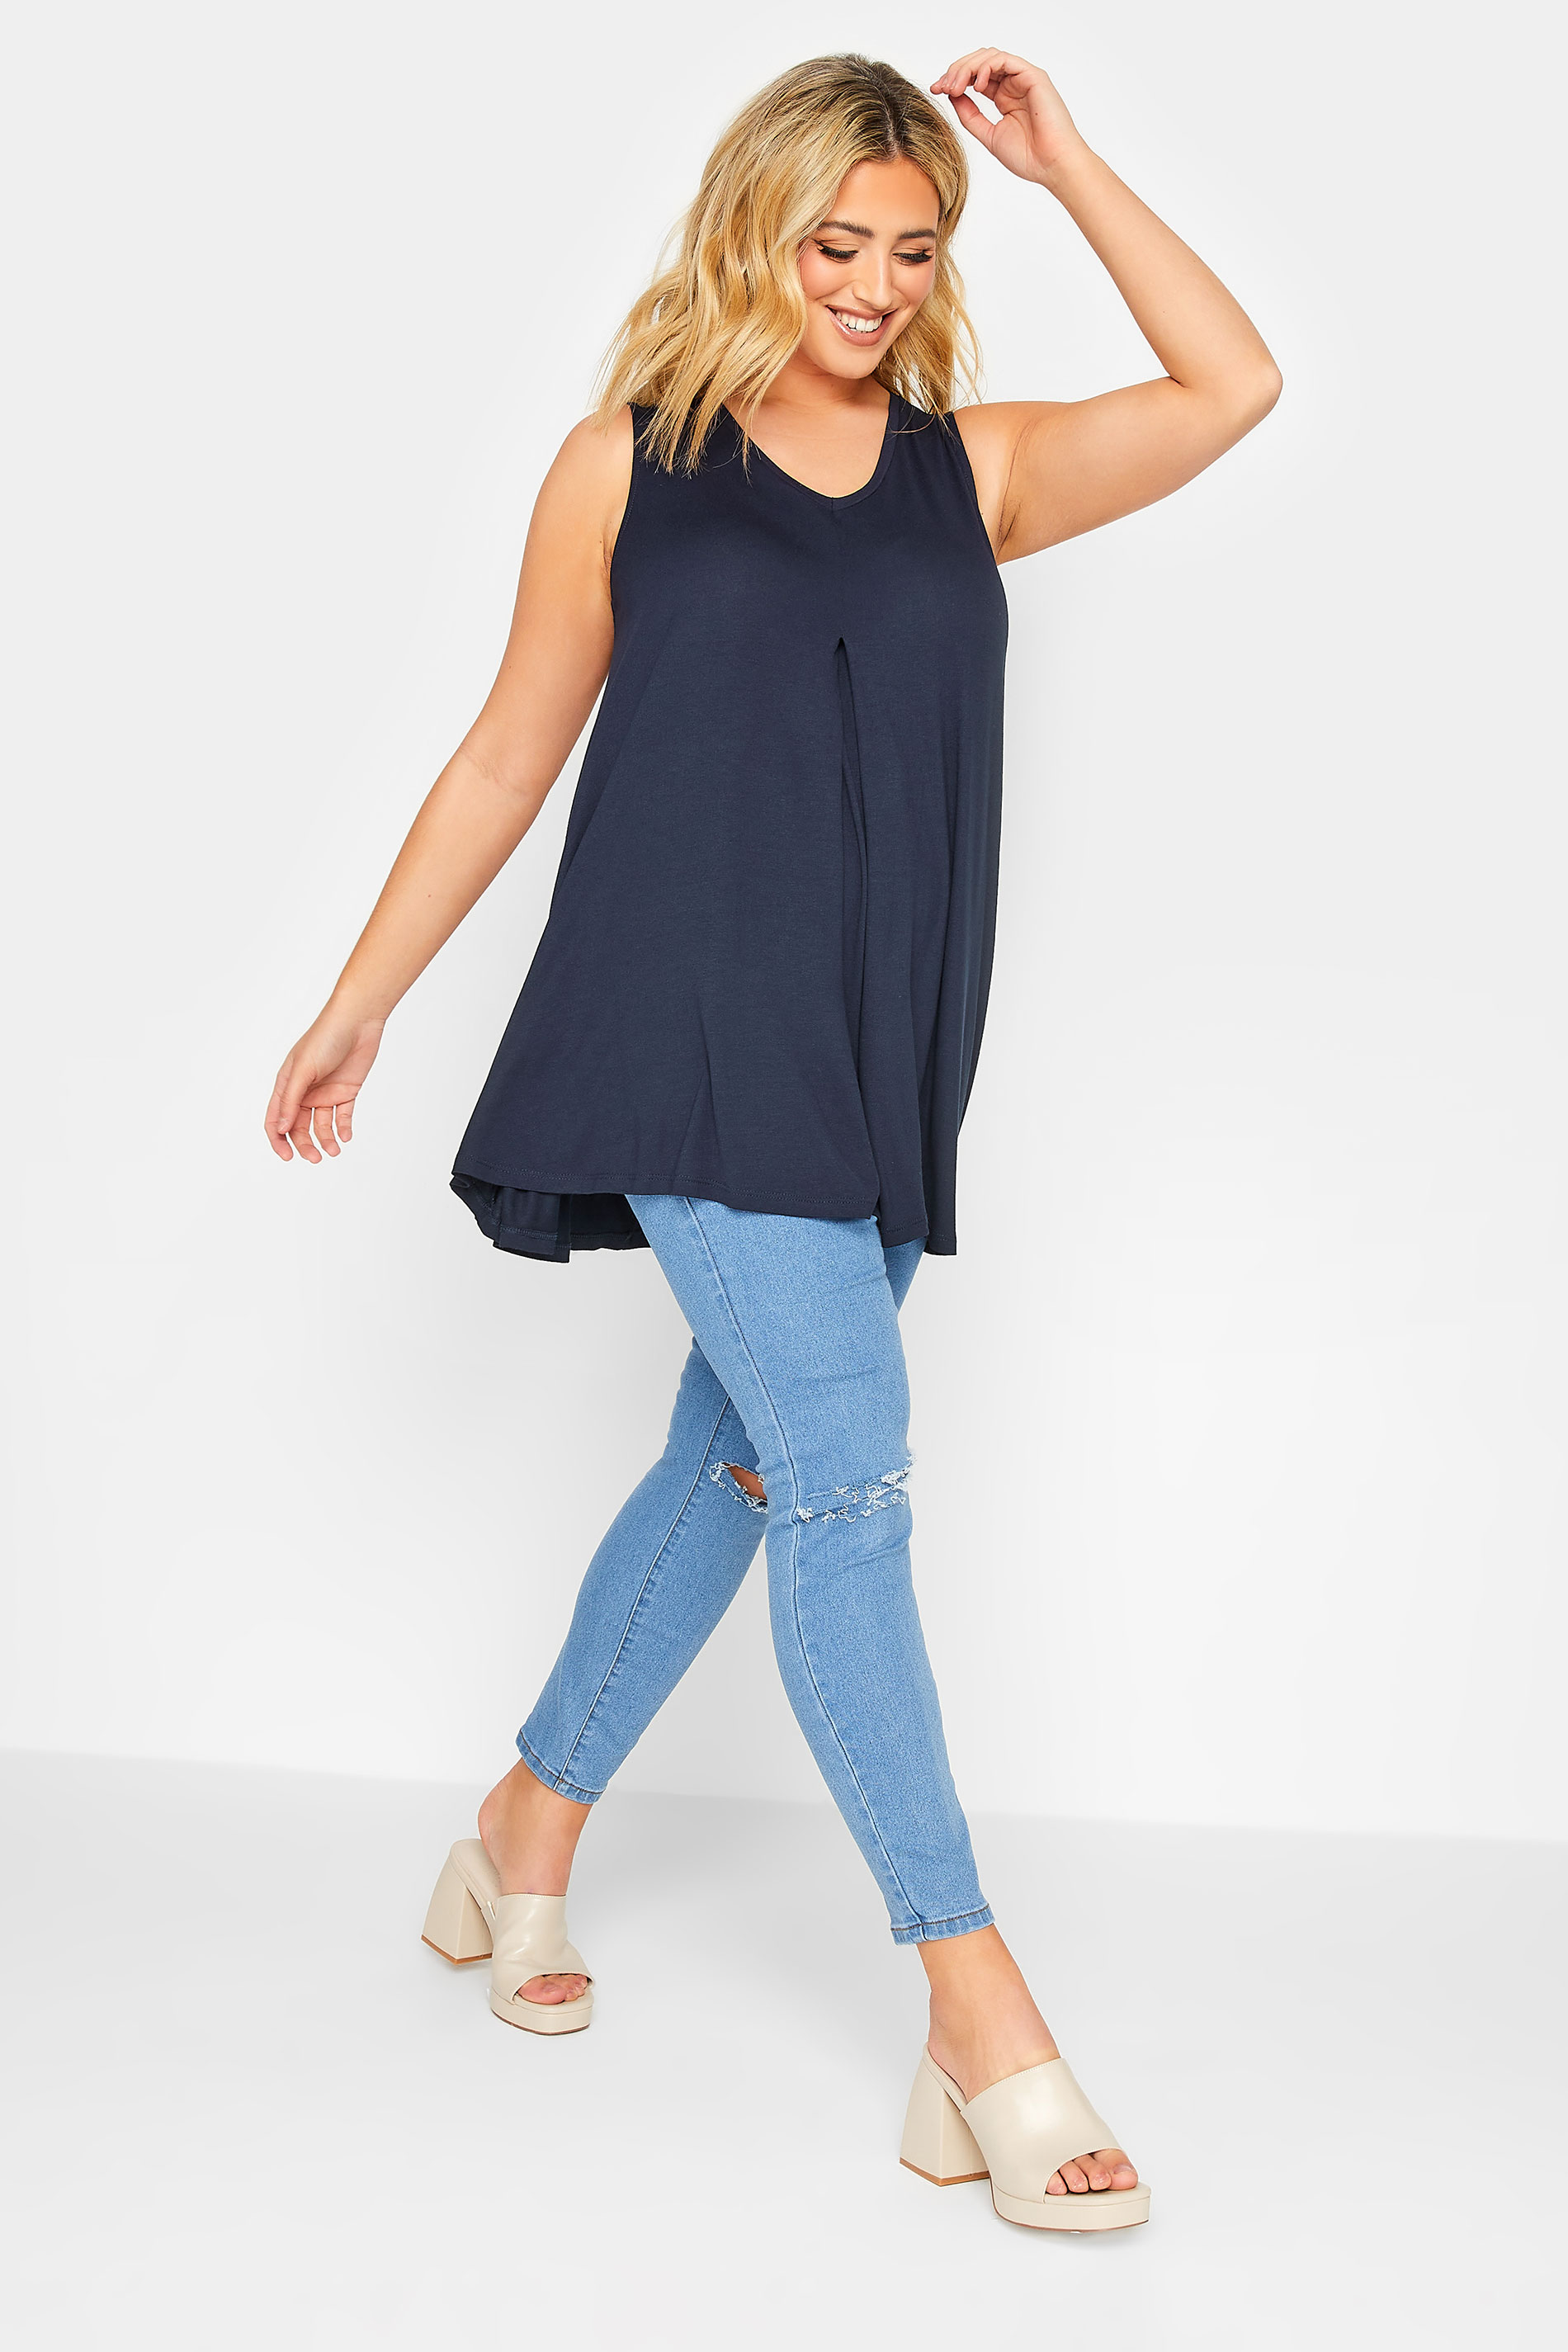 YOURS Curve Plus Size Navy Blue Swing Vest Top | Yours Clothing  2